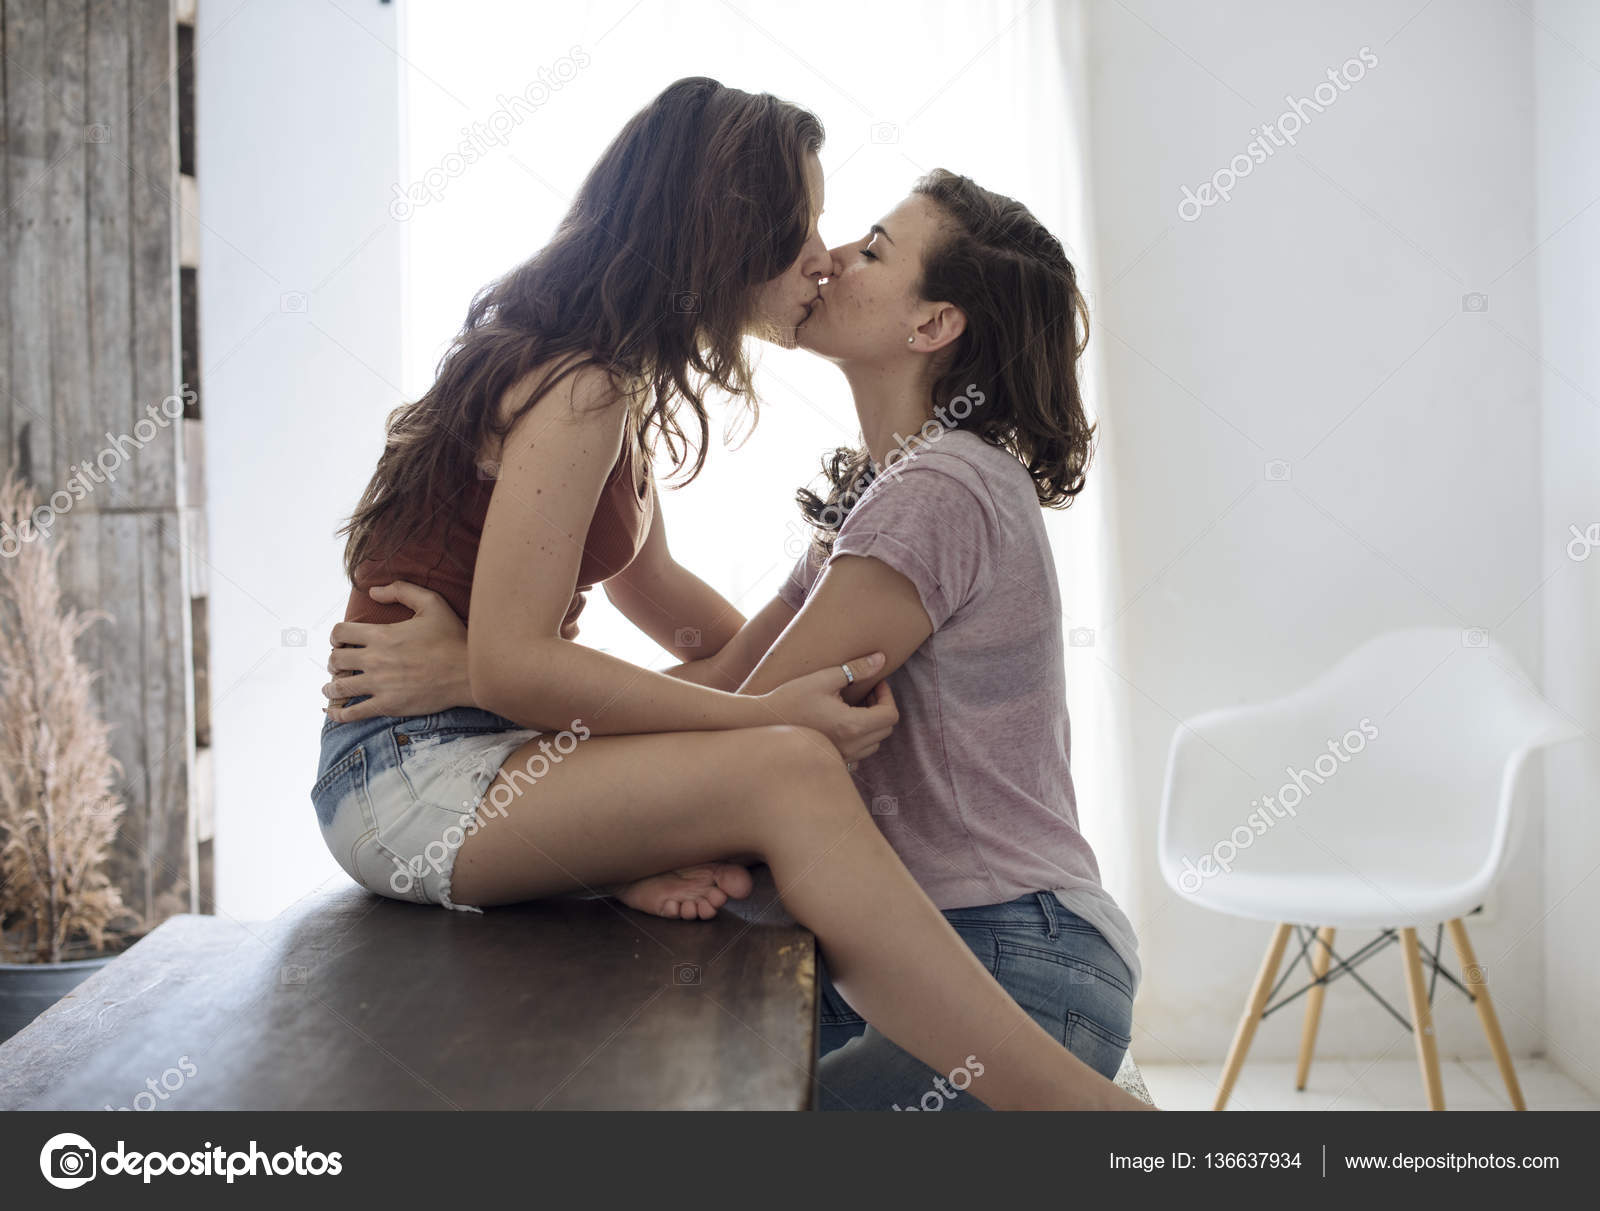 Lesbian Makeing Out